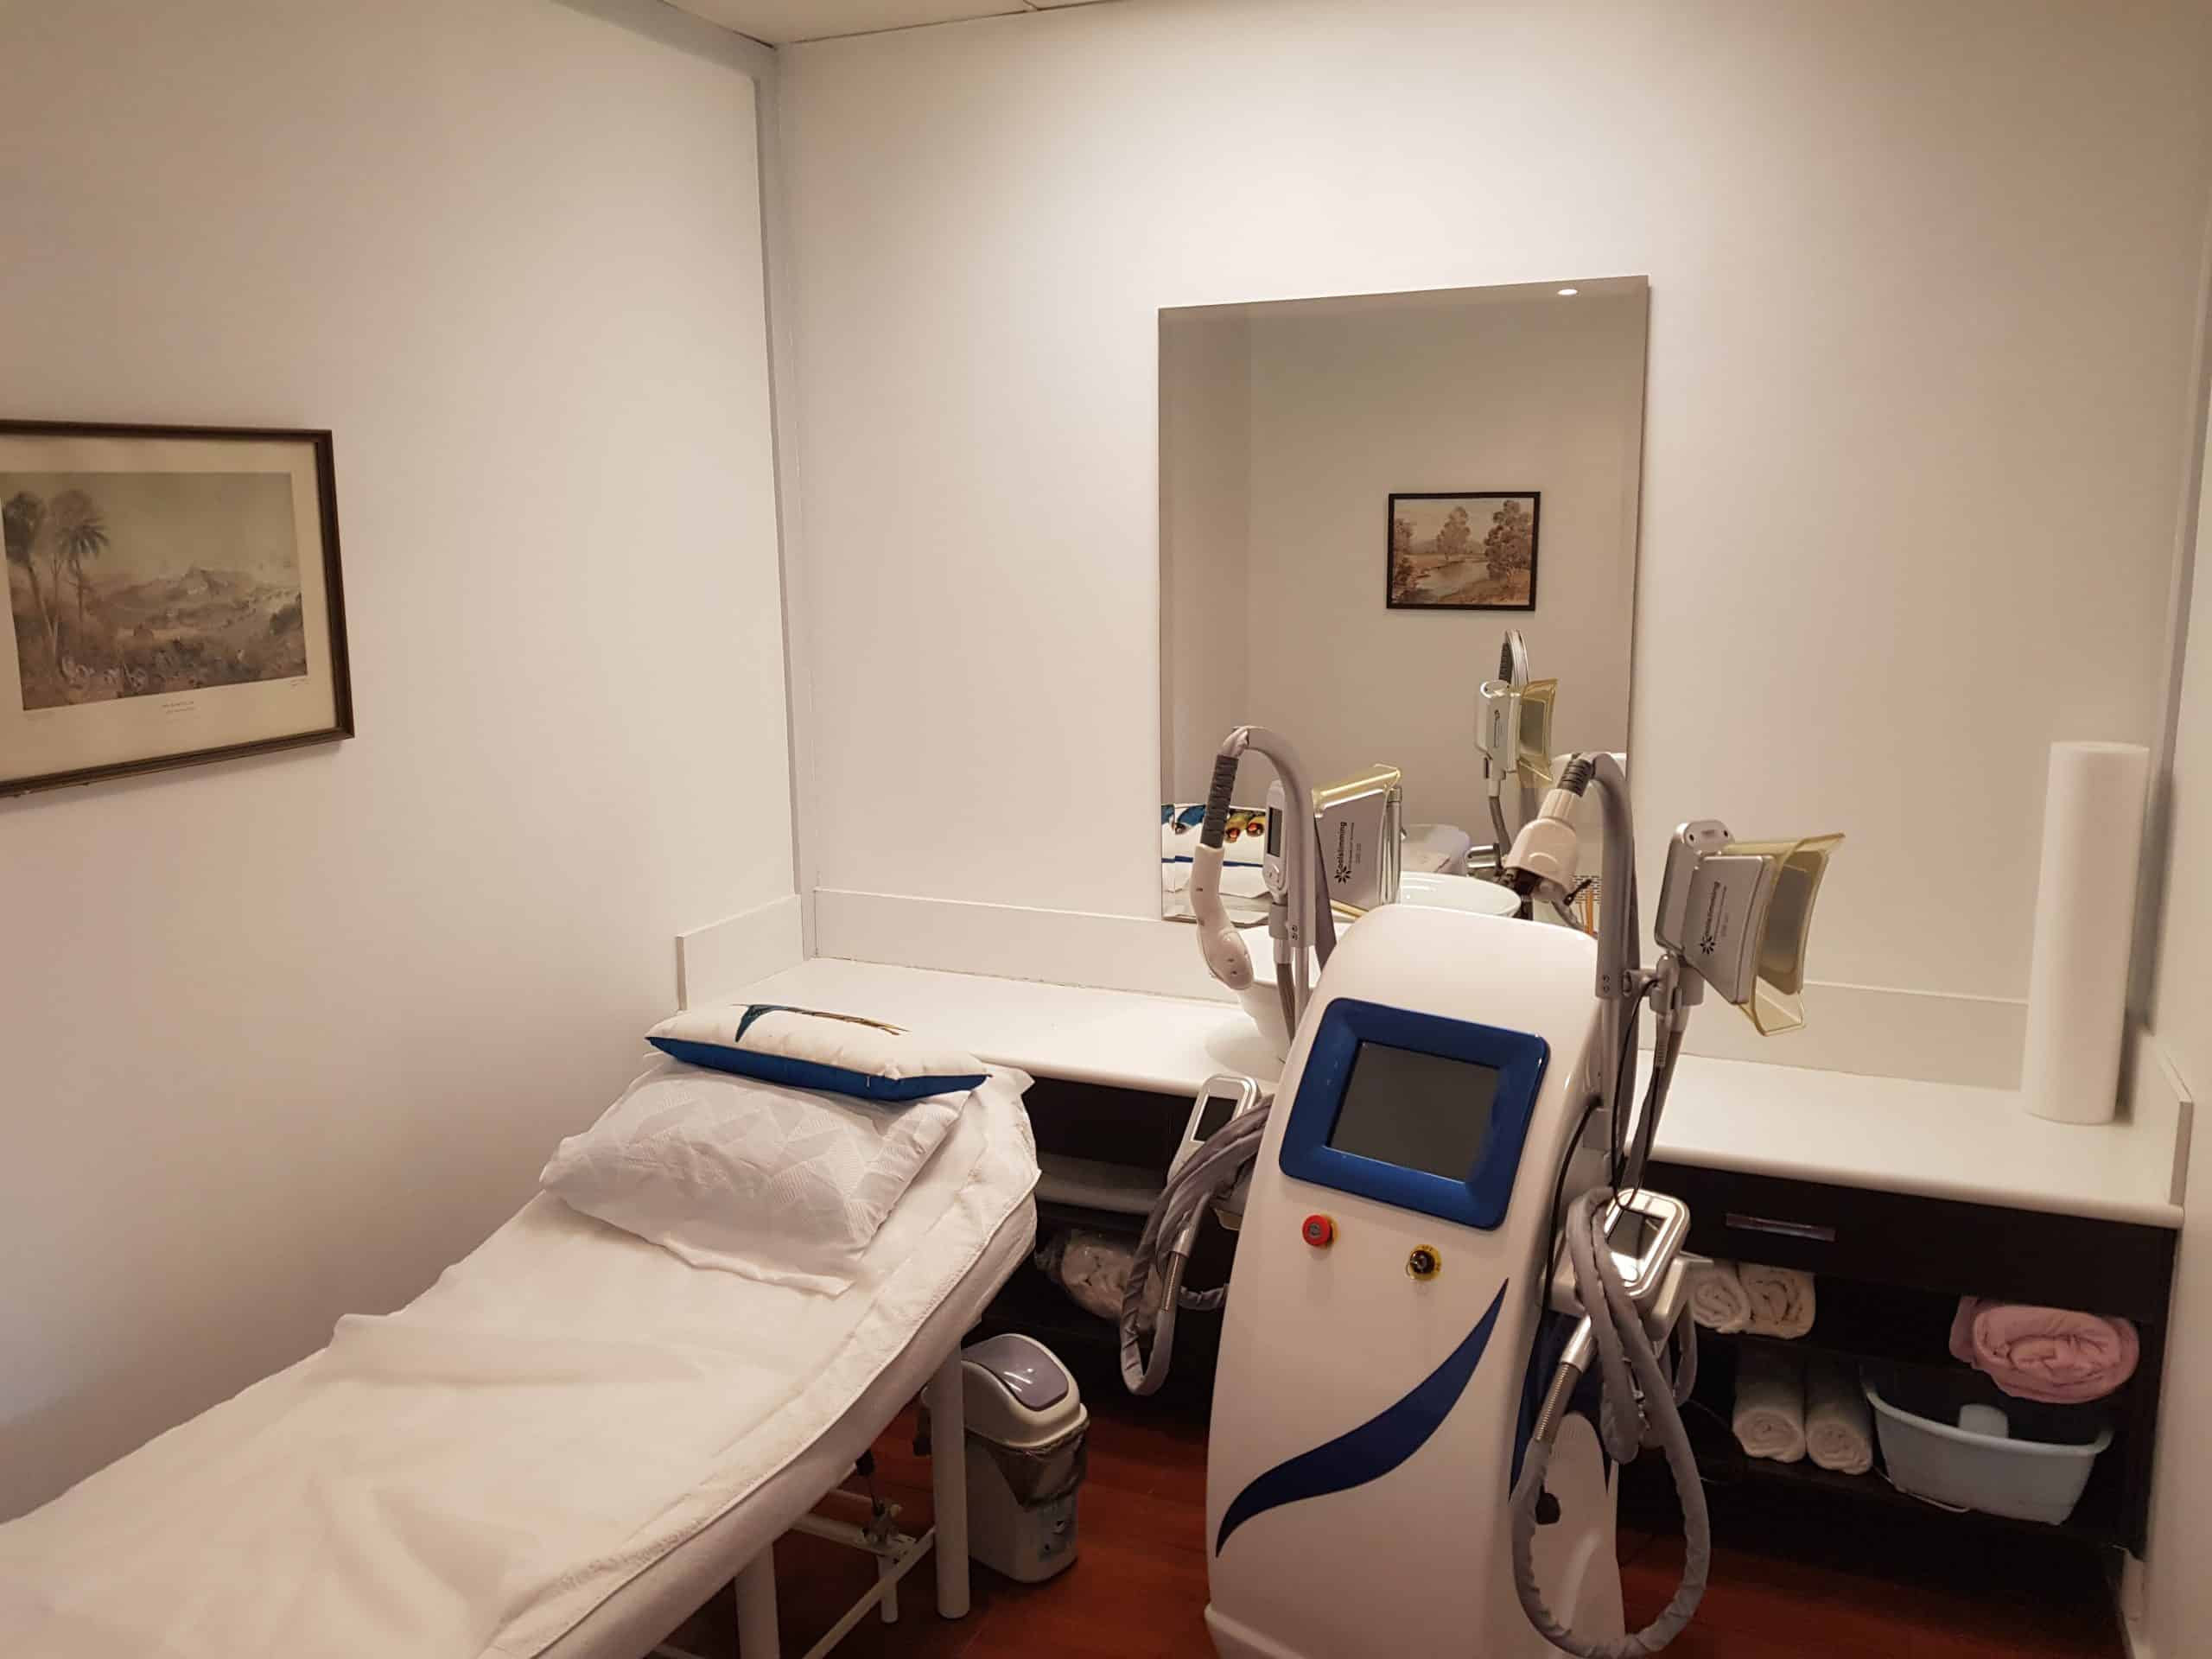 Top tier laser clinic for sale Lane Cove be quick